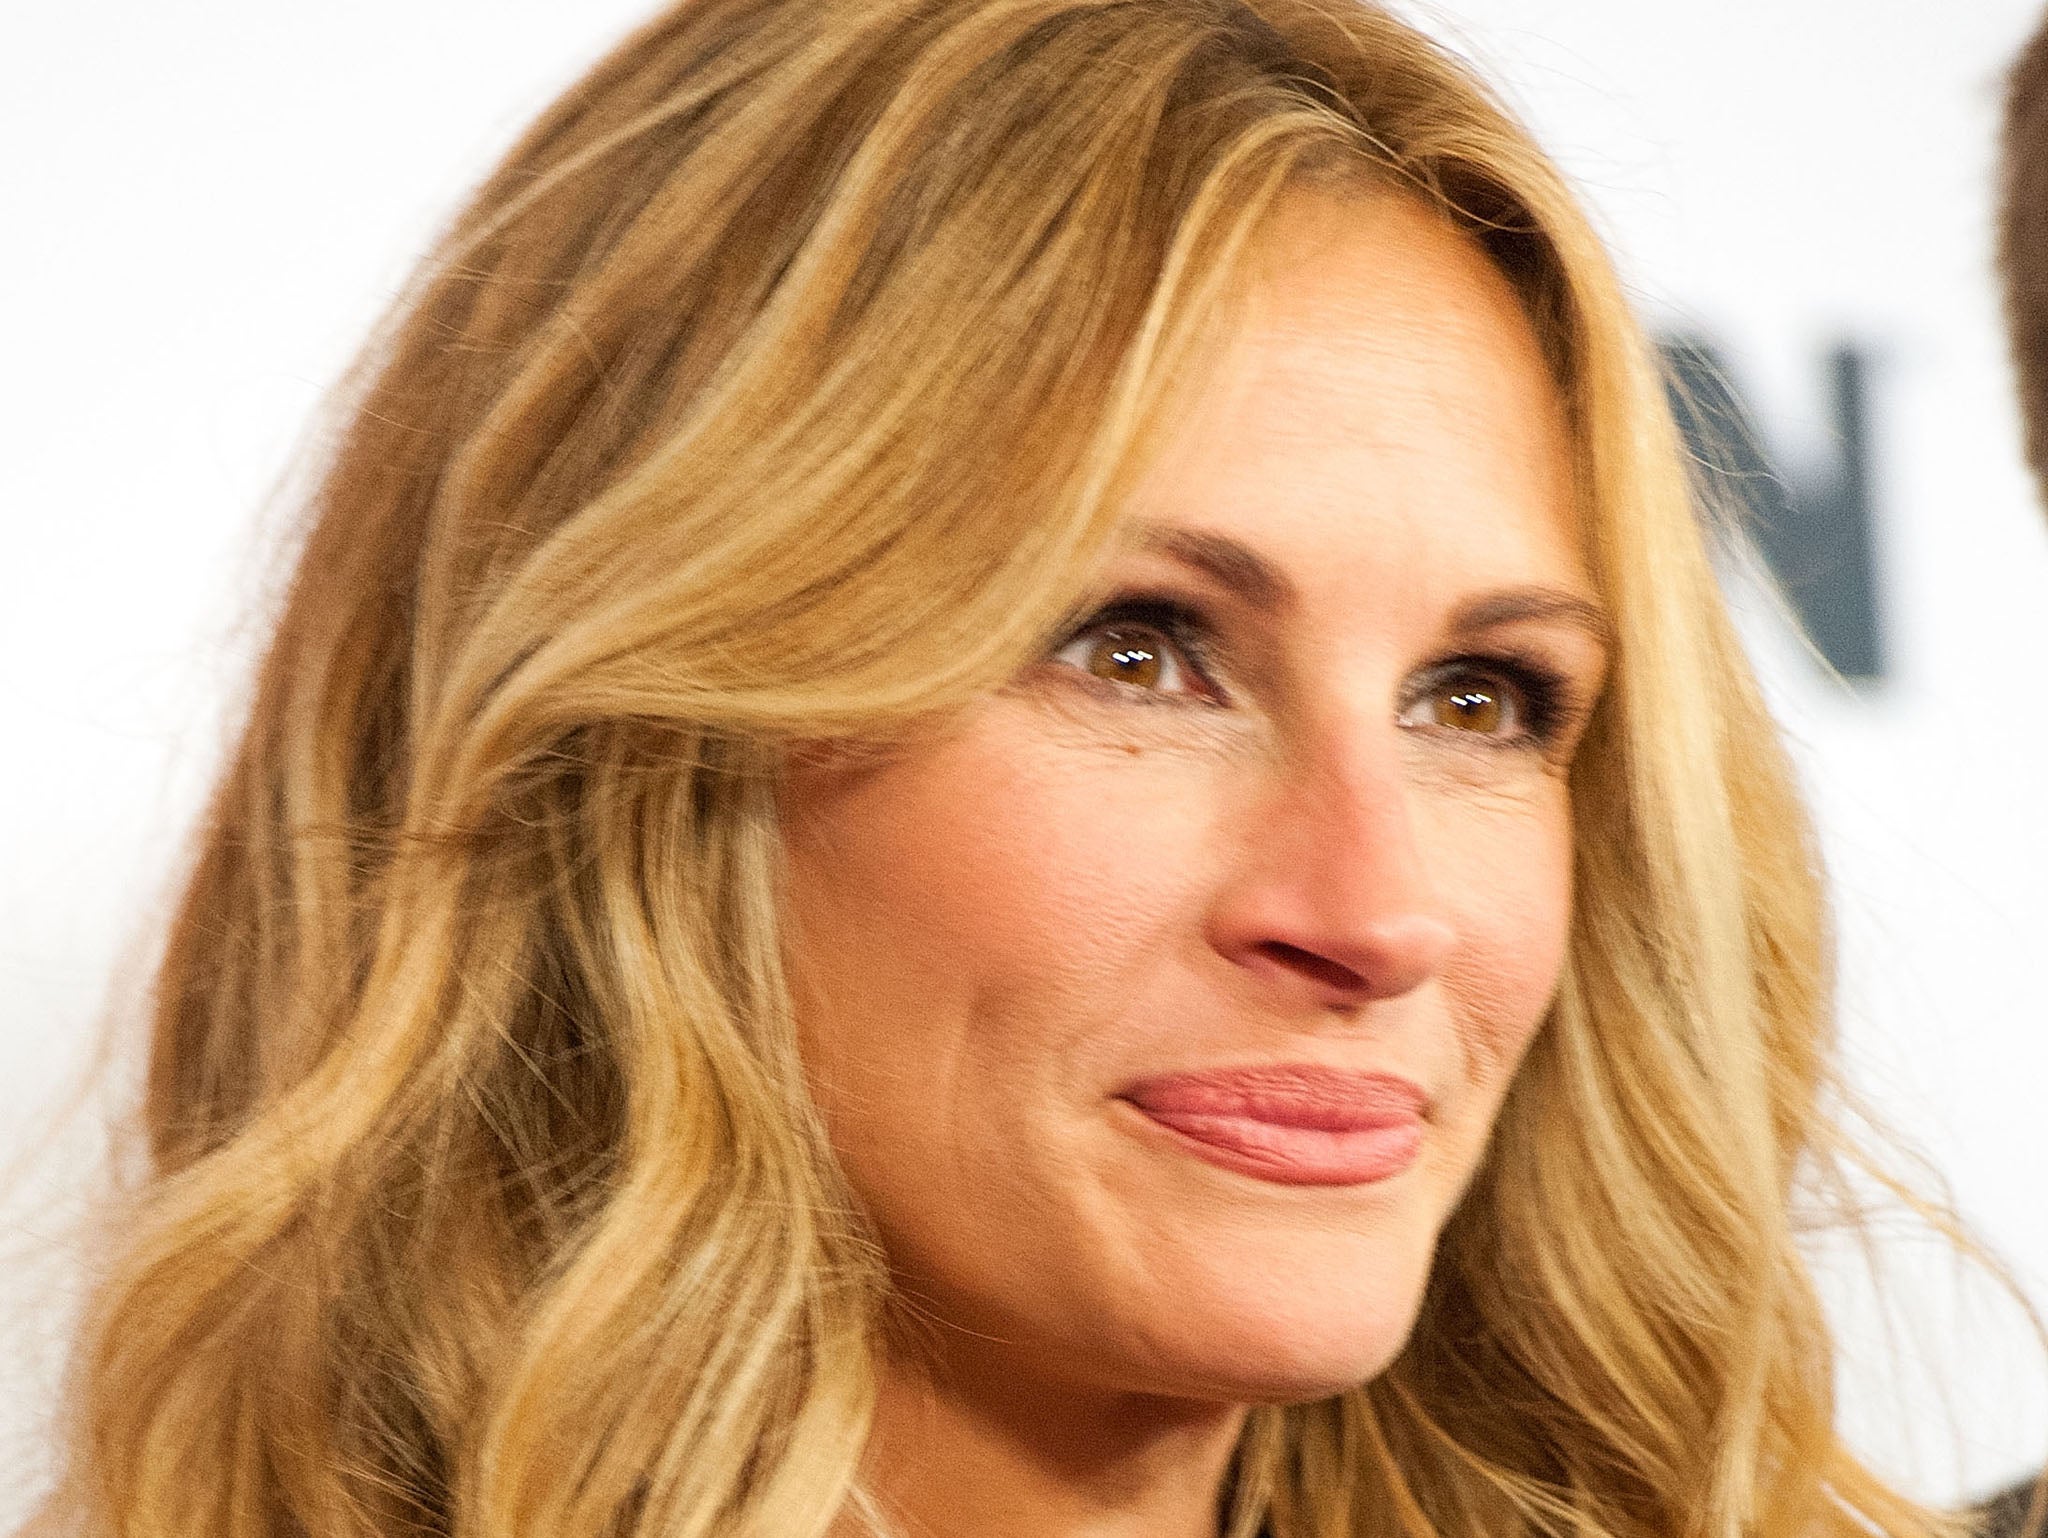 Julia Roberts told You magazine she felt she had "taken a risk" by not having a face lift